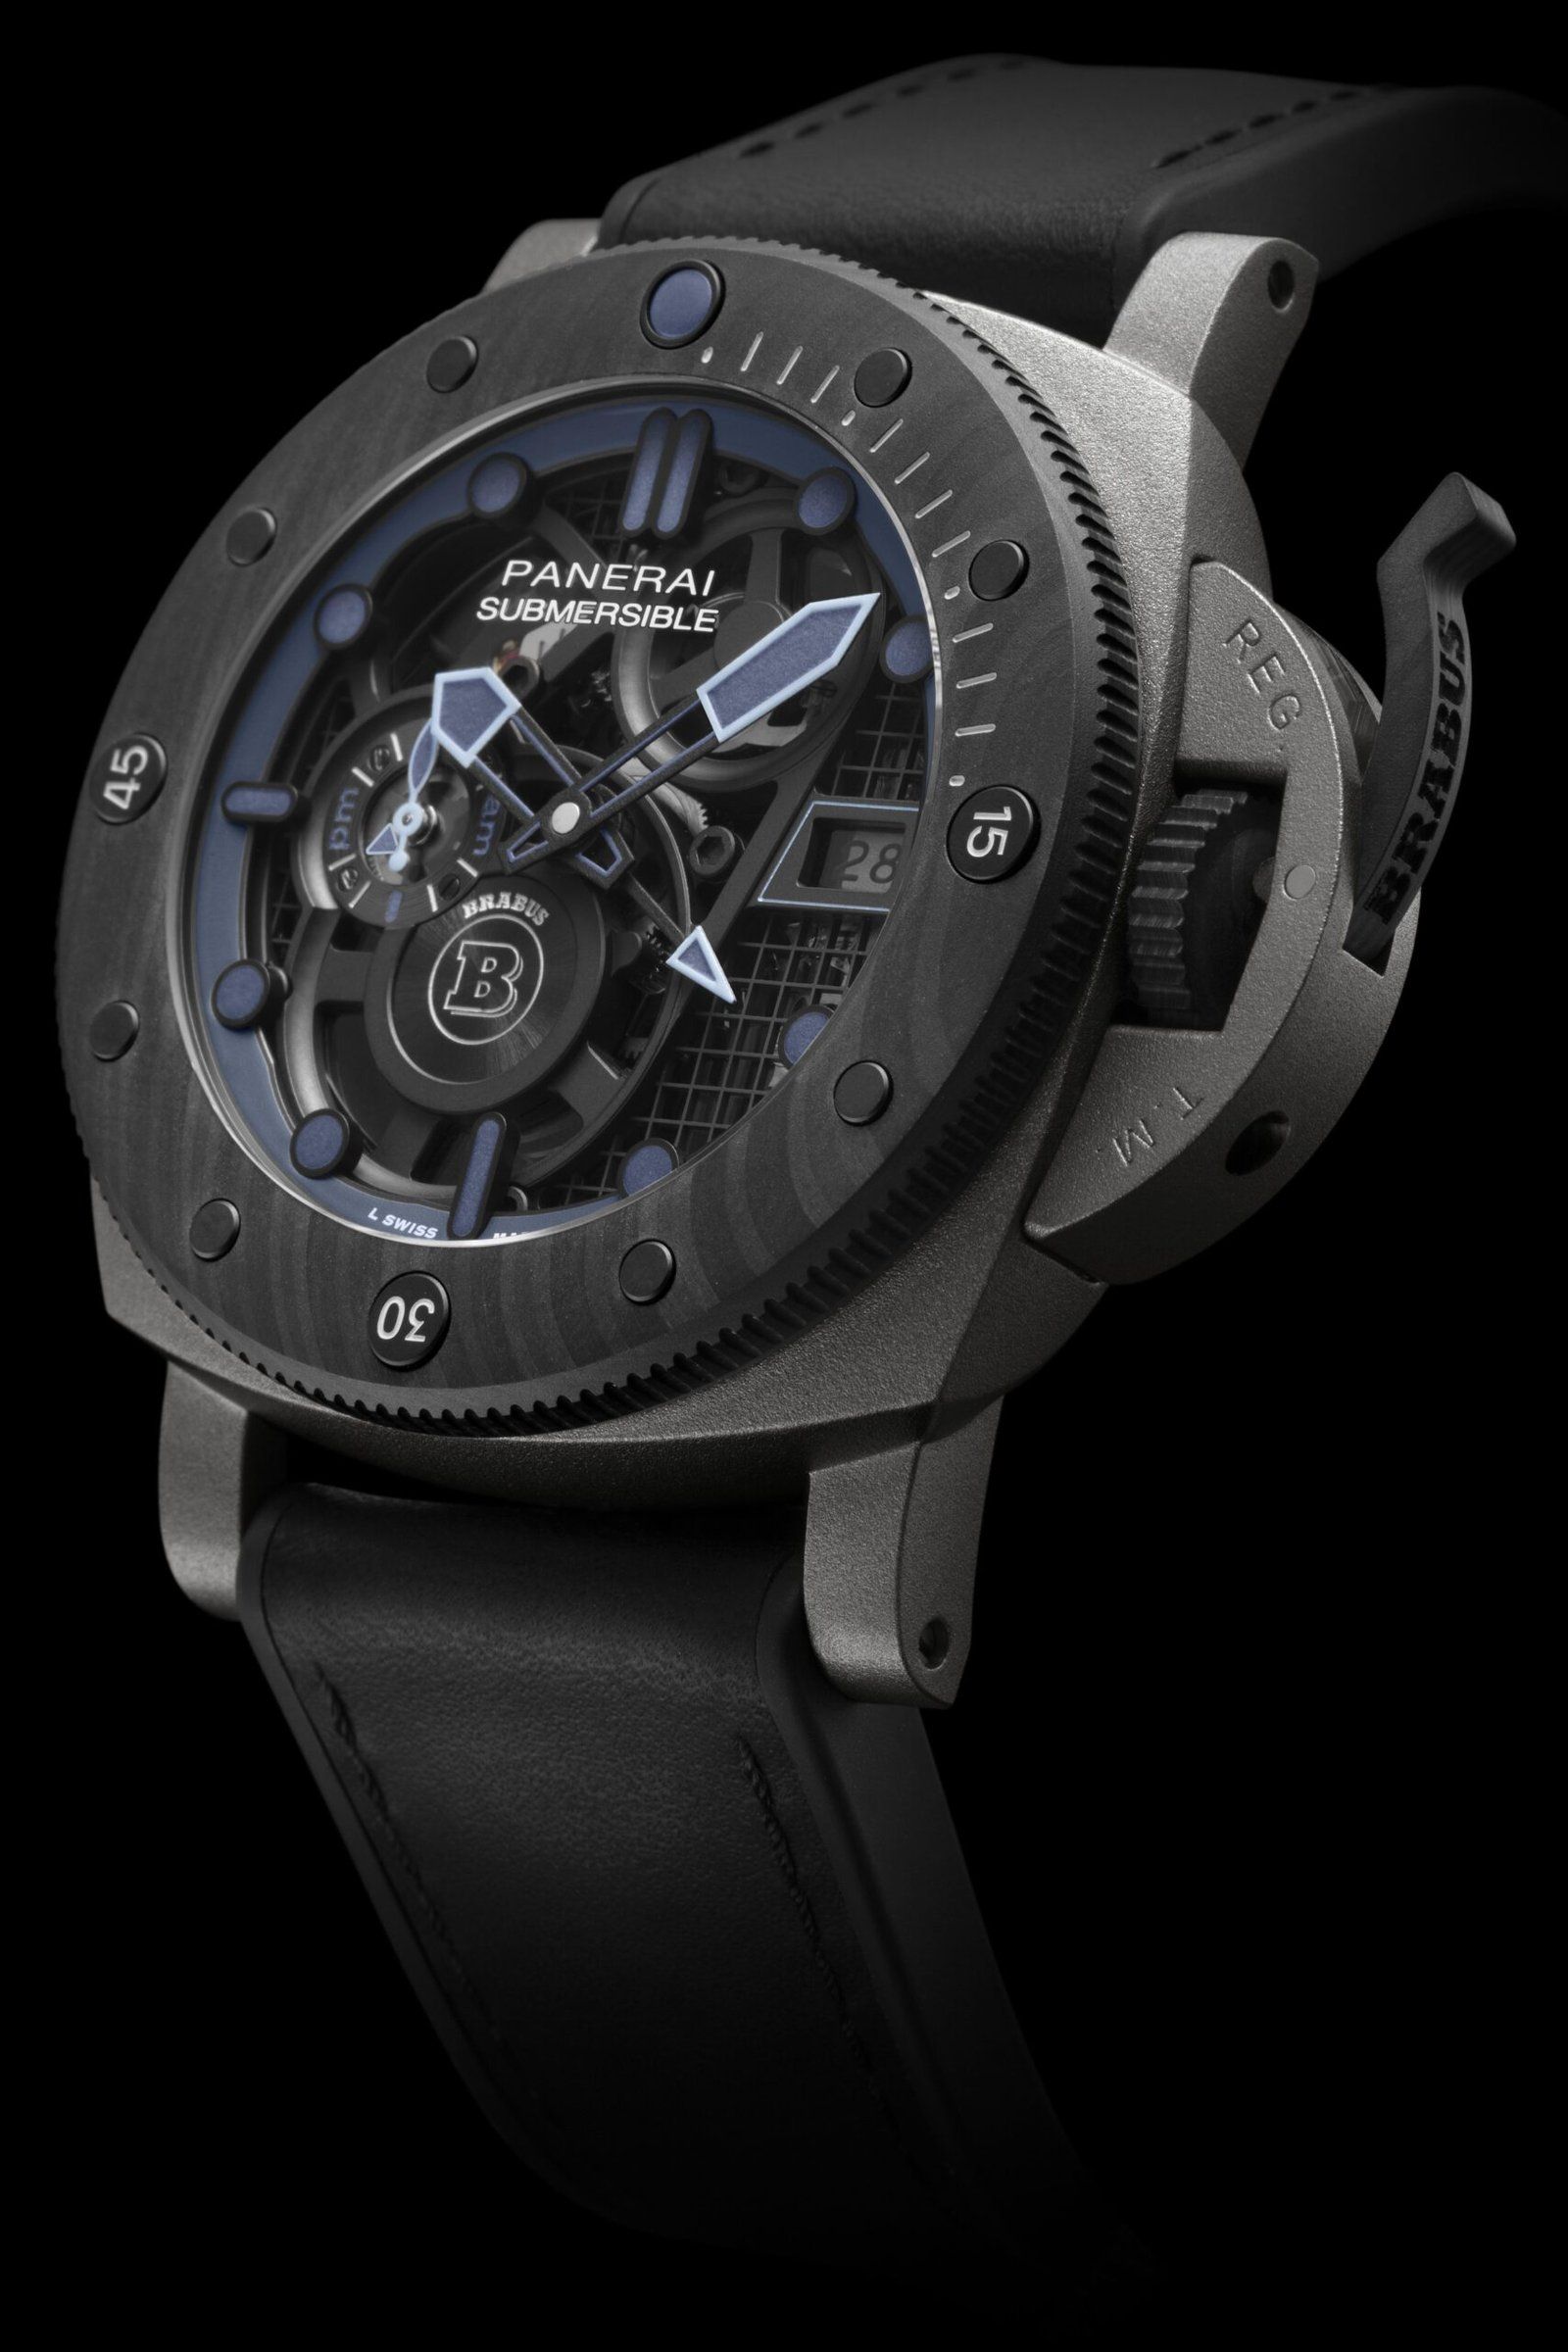 Surf Those Waves With The Panerai Submersible S Brabus Blue Shadow Edition